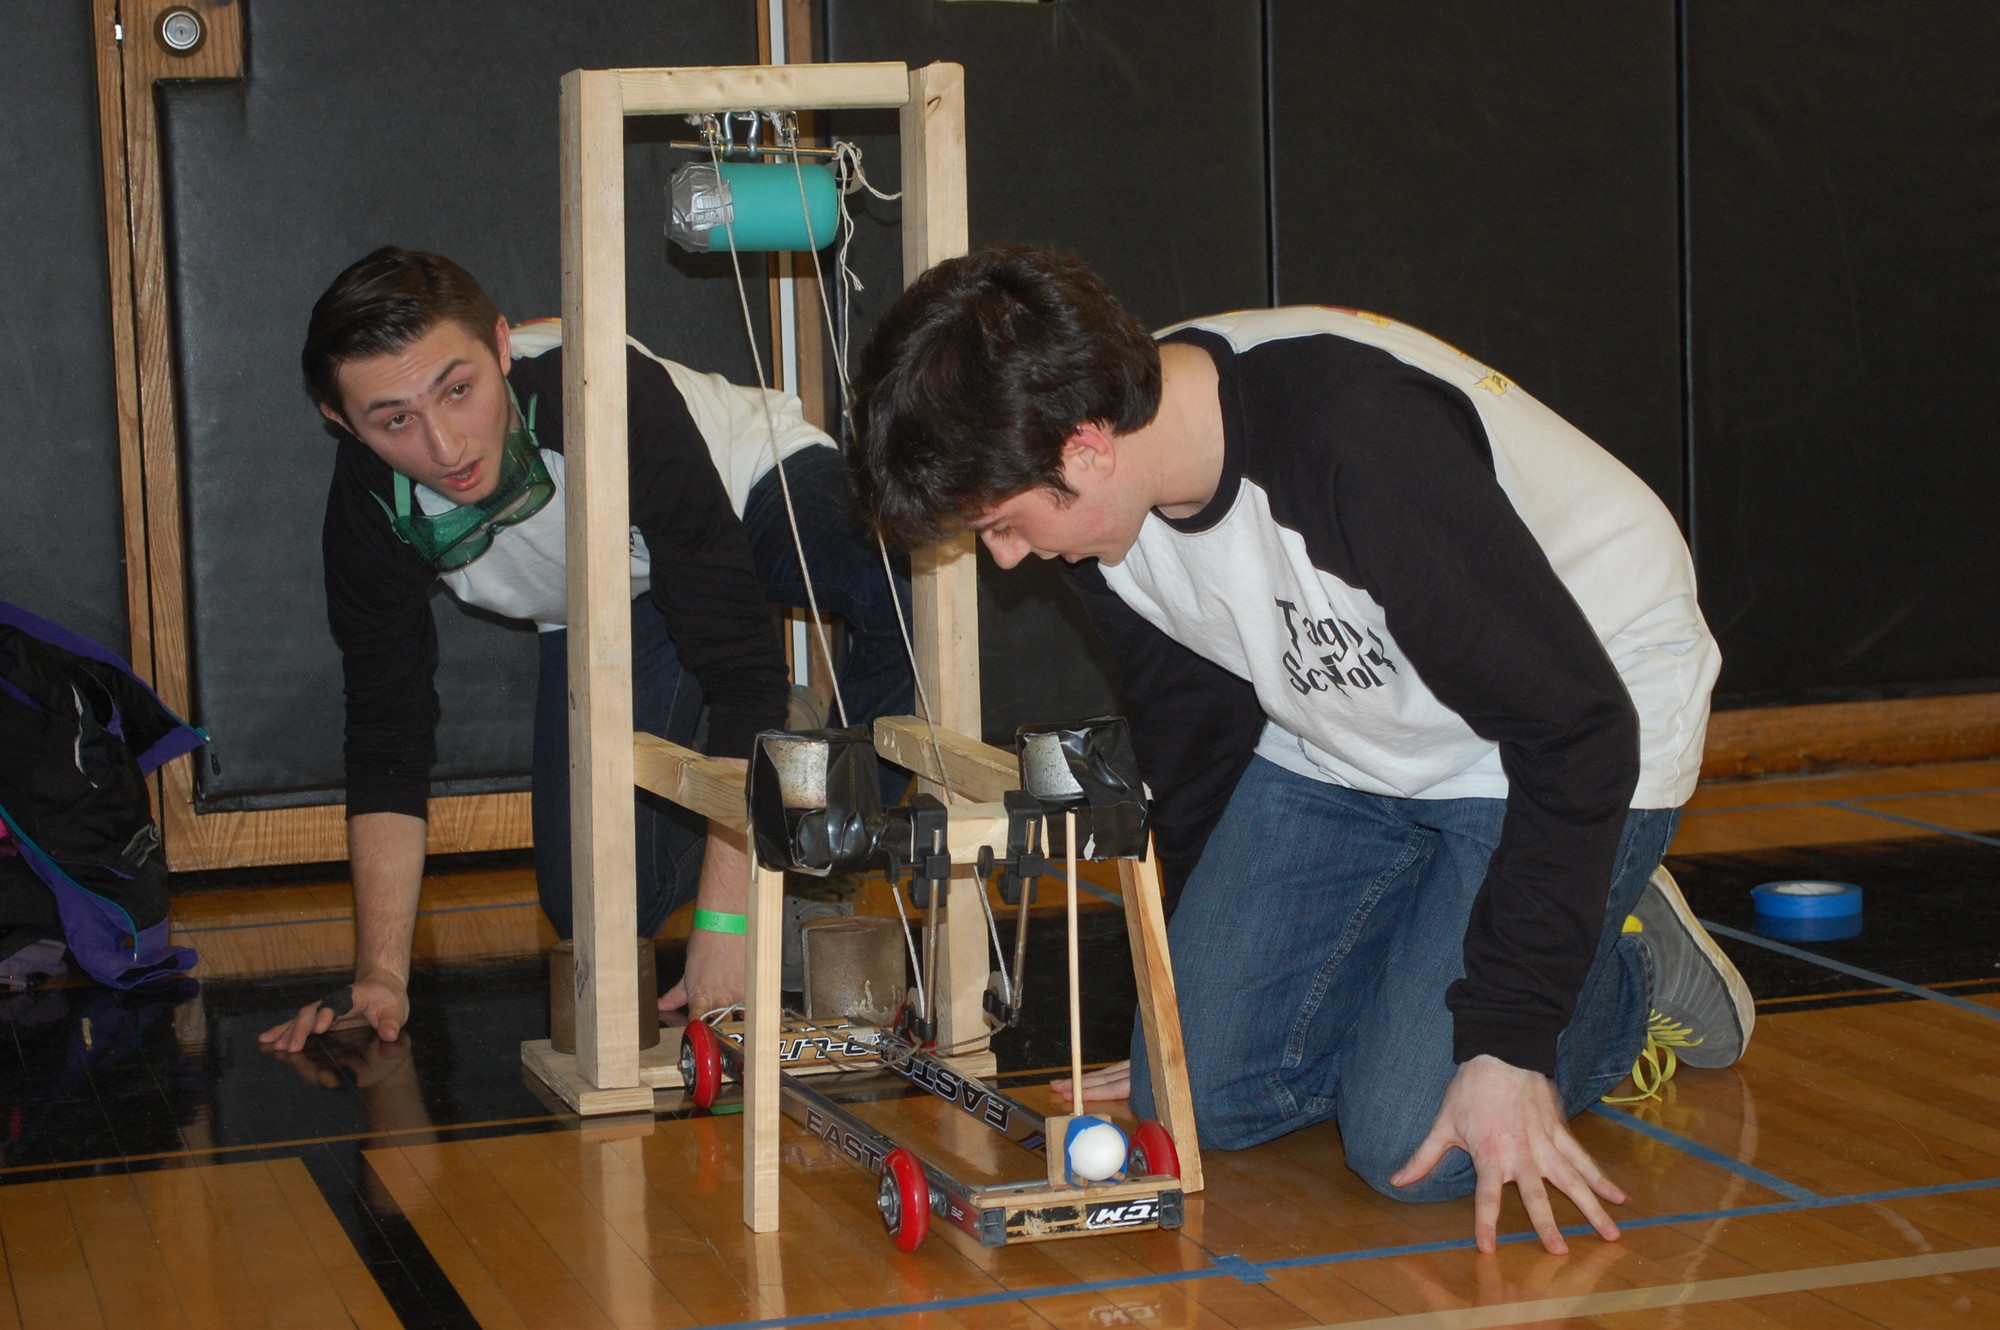 Wantagh High School seniors Zach Diaks, left, and Kyle Rhodehouse set up their machine in the Scrambler event at the Science Olympiad regional competition on Jan. 31.